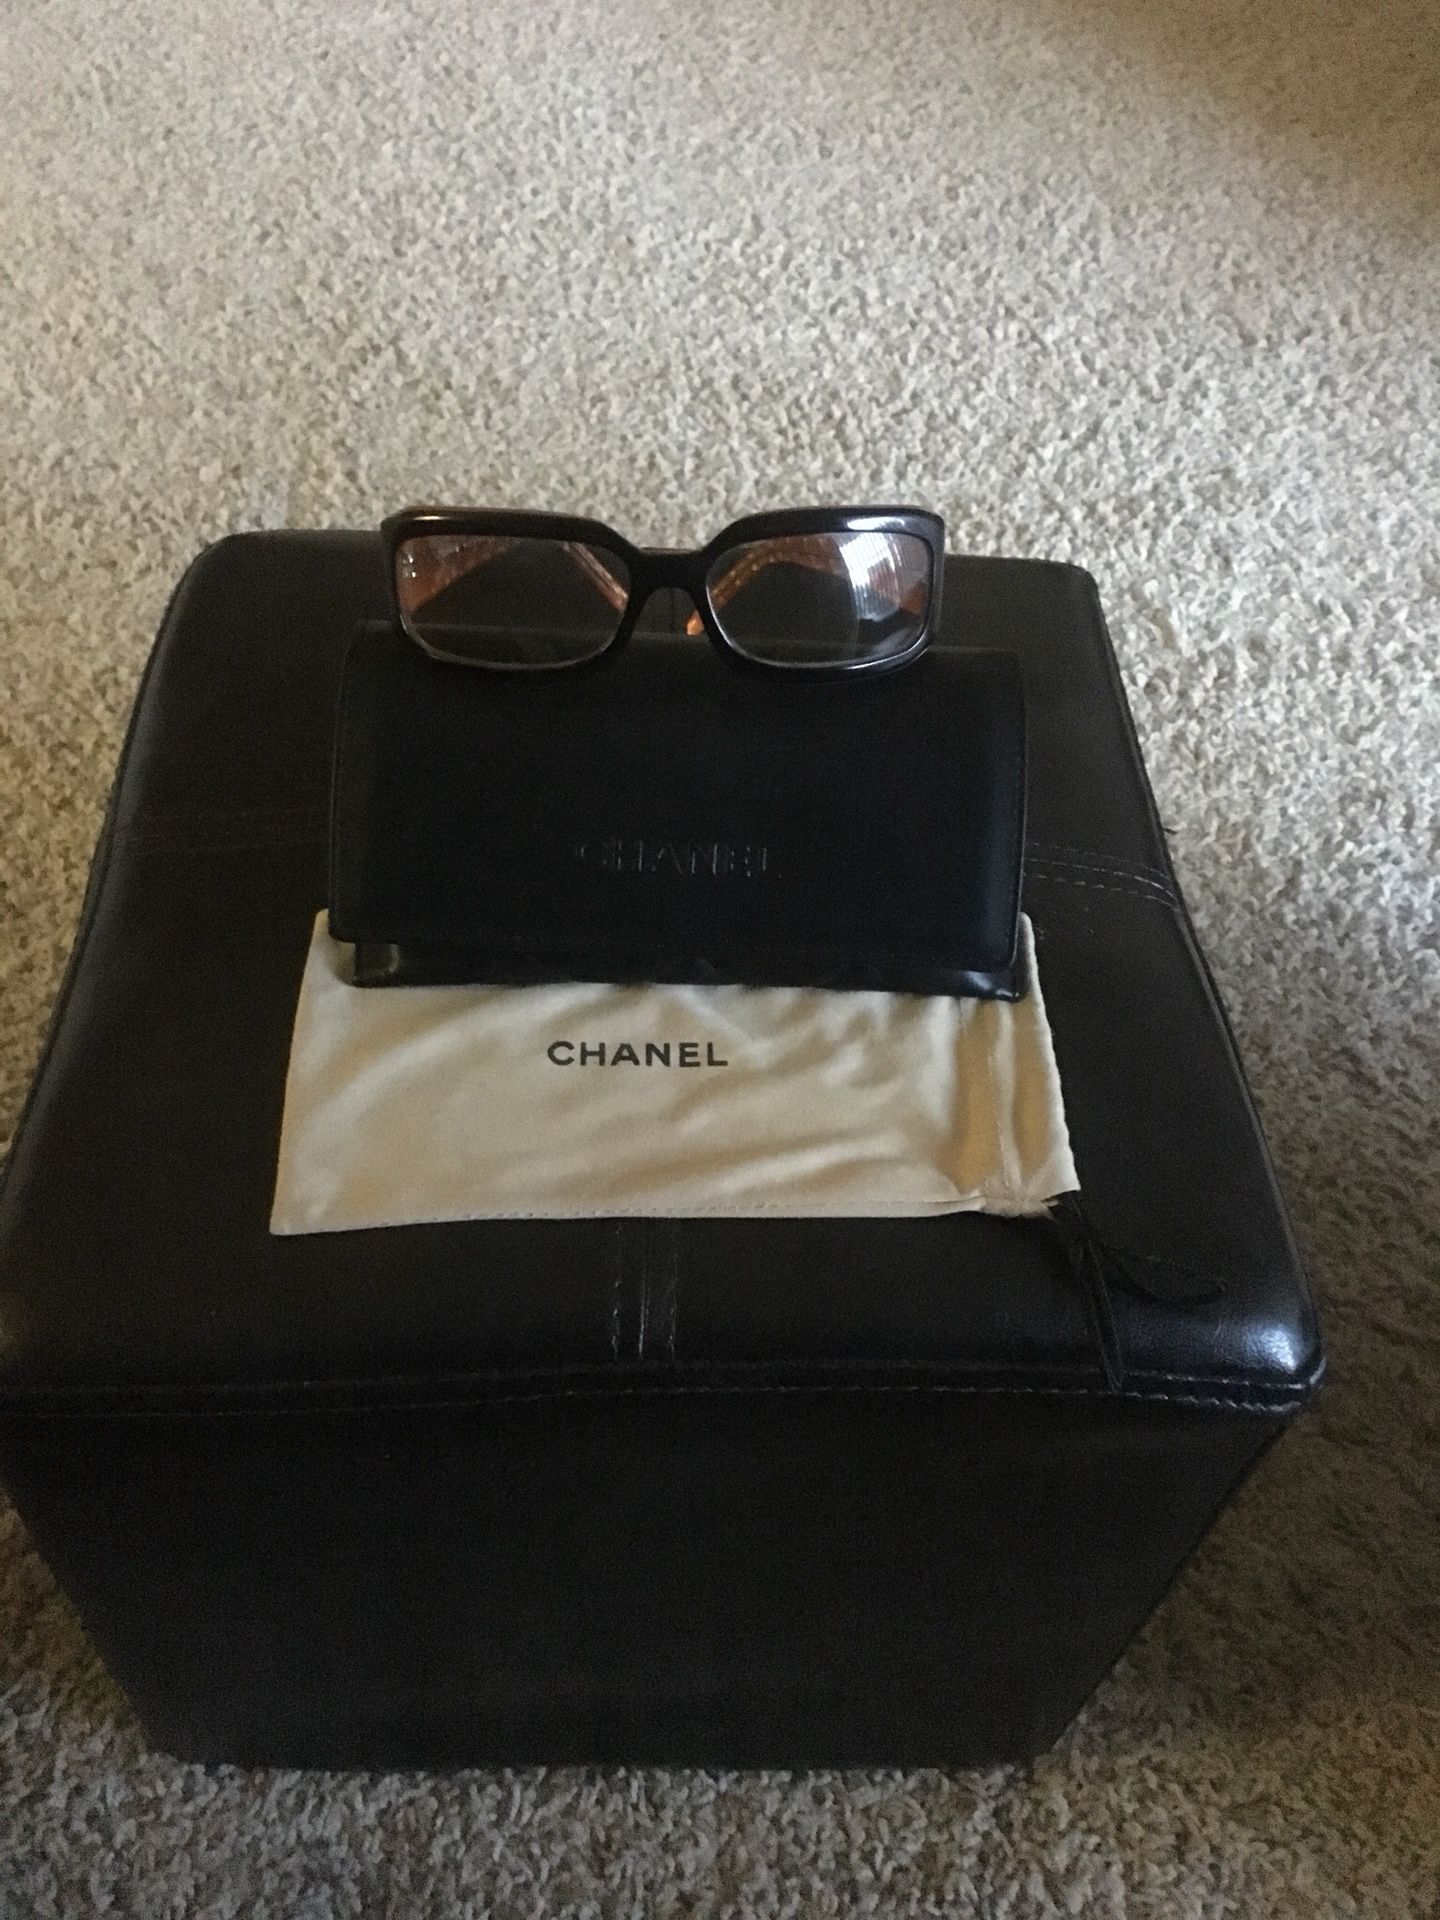 Authentic Chanel Y2K sunglasses for Sale in Apple Valley, CA - OfferUp